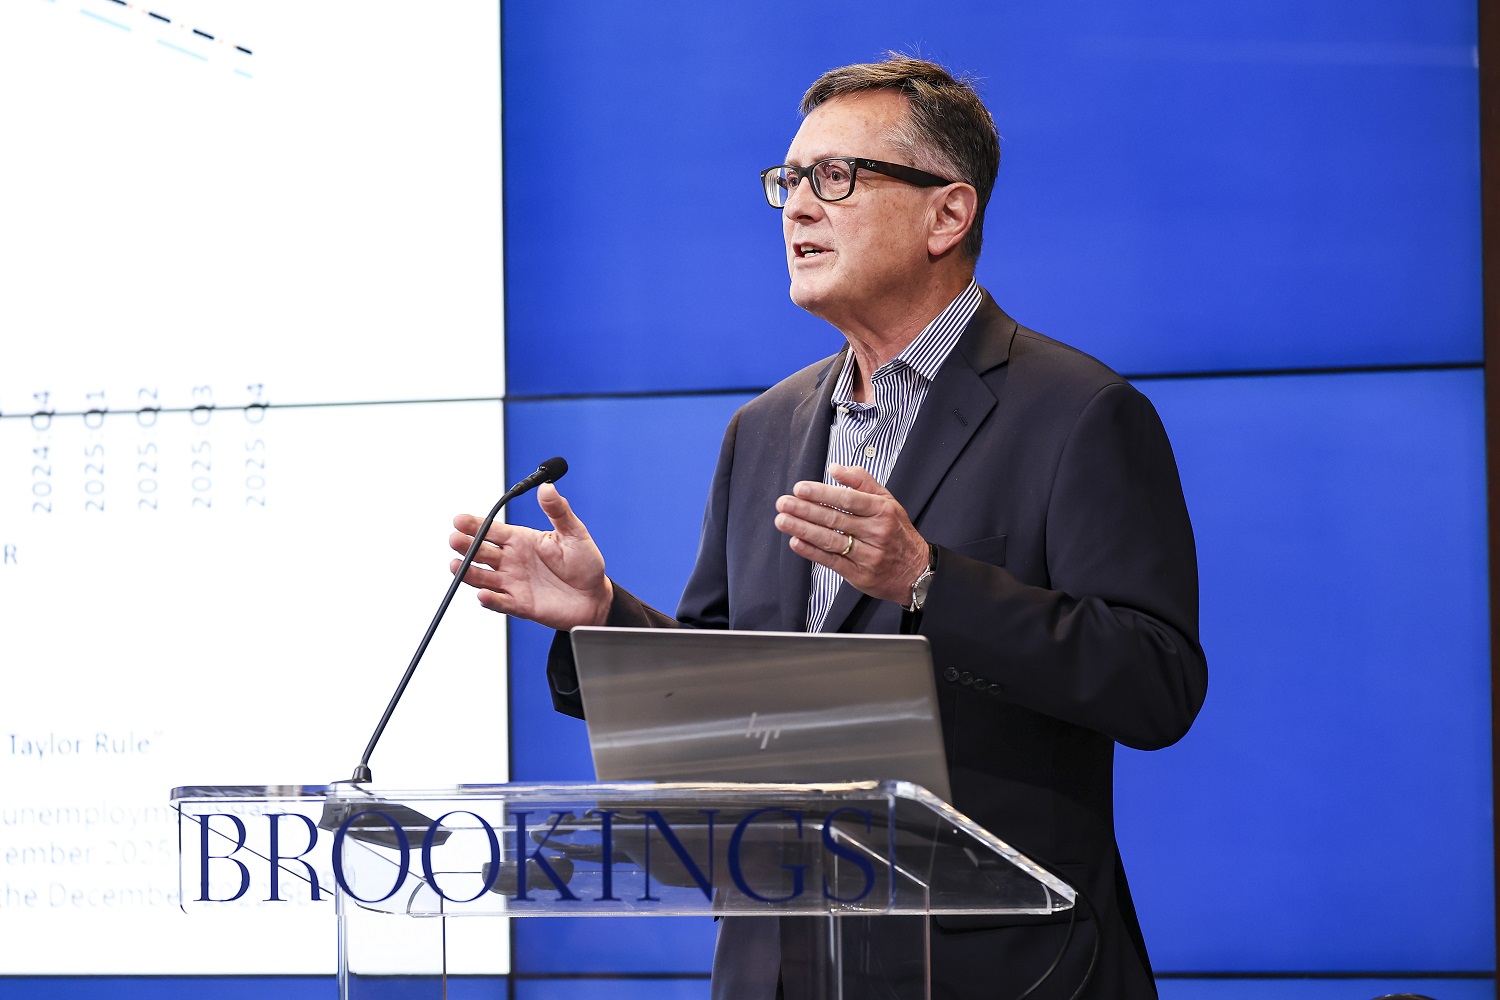 Richard Clarida speaking at the Brookings Institution